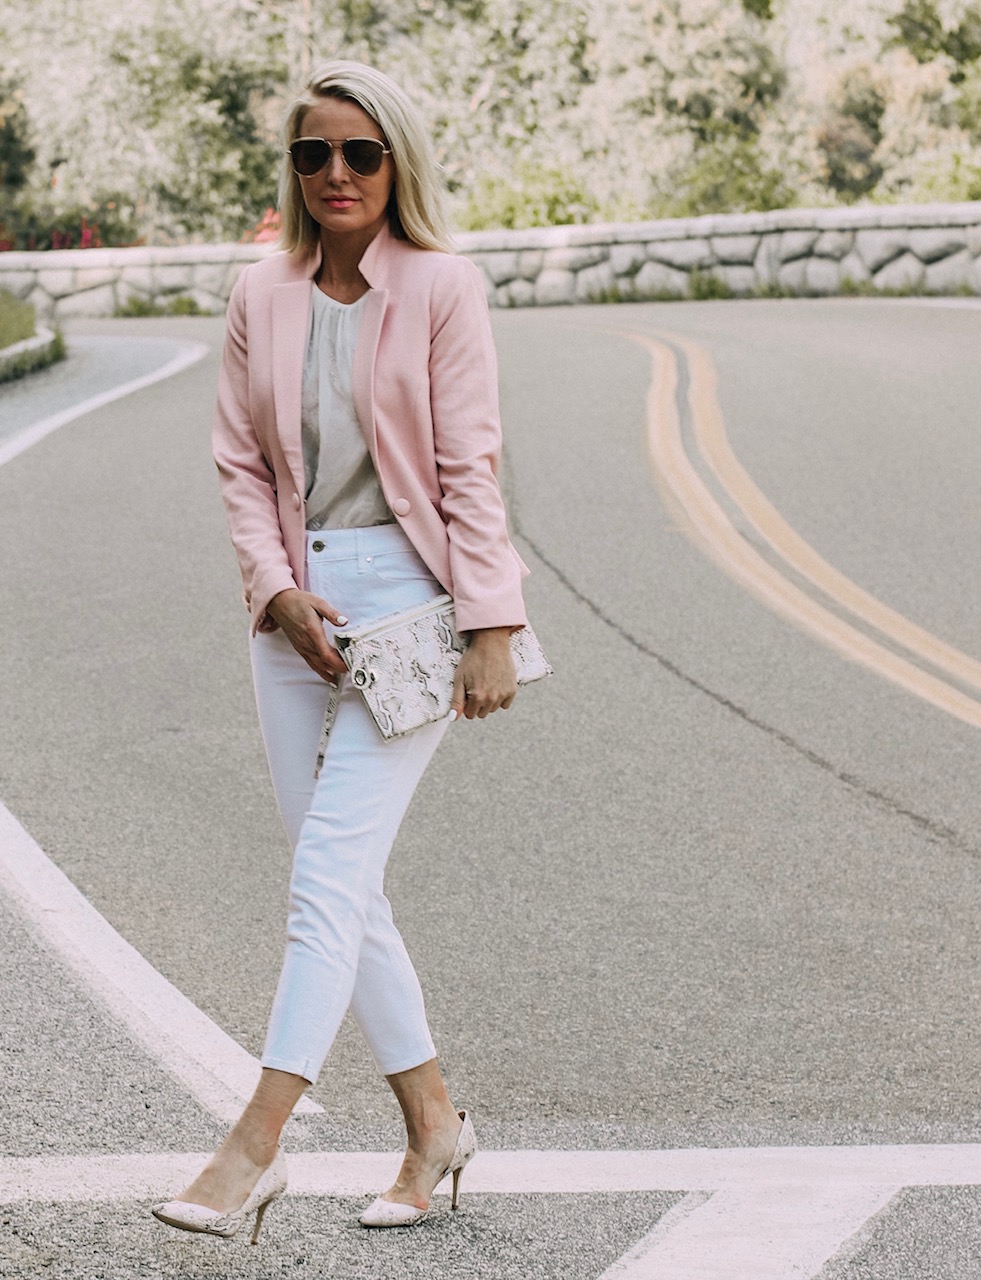 Spring Office Outfits, Fashion blogger Erin Busbee of BusbeeStyle.com wearing a blazer with a snake print shell and white cropped jeans, with pink snake print heels and clutch from White House Black Market in Sequoia National Park